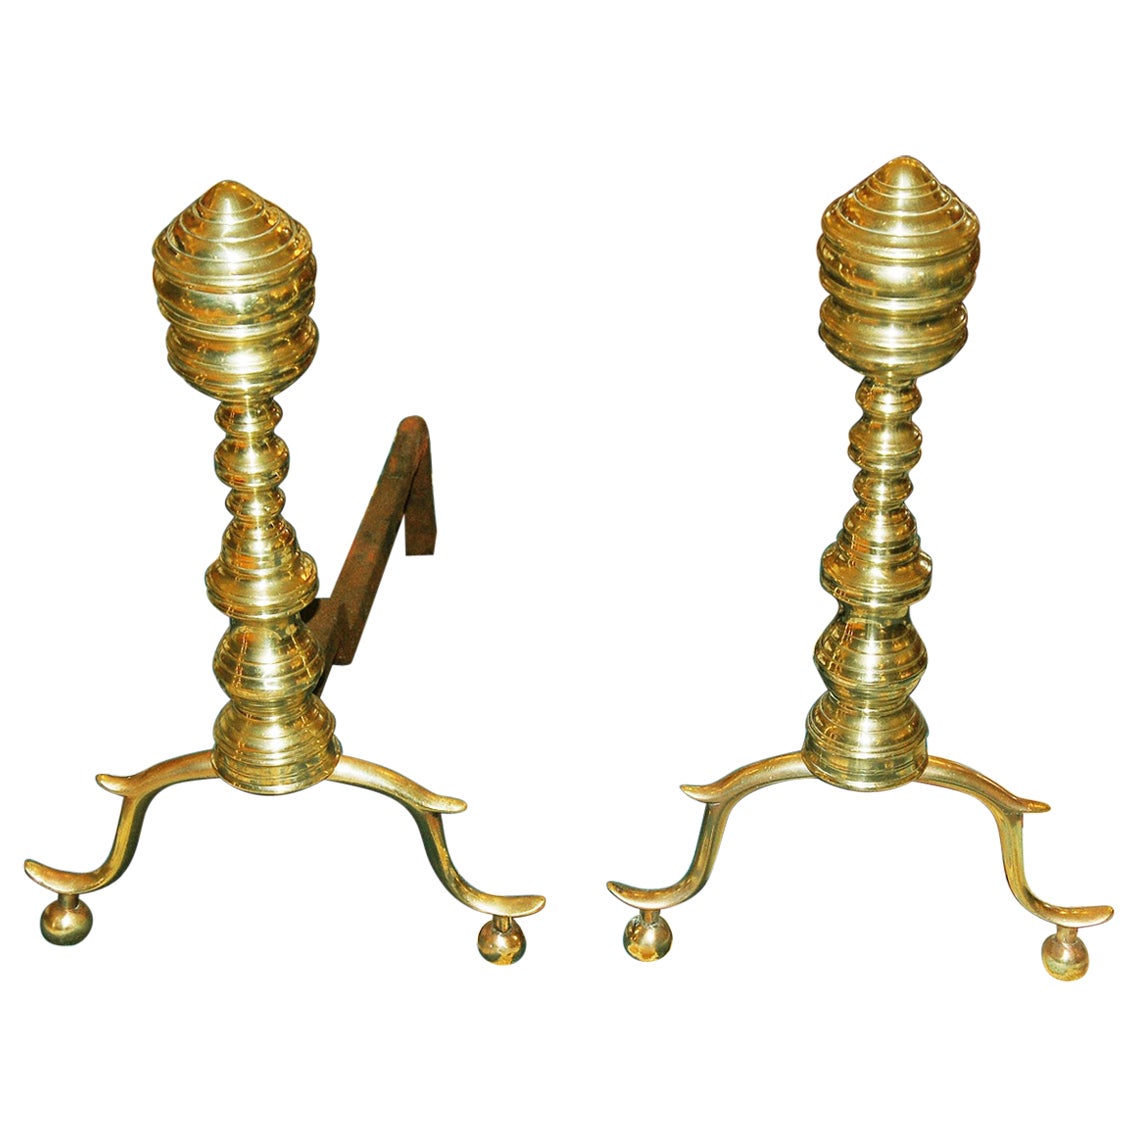 American Early 19th Century Empire Seamed Brass Andirons